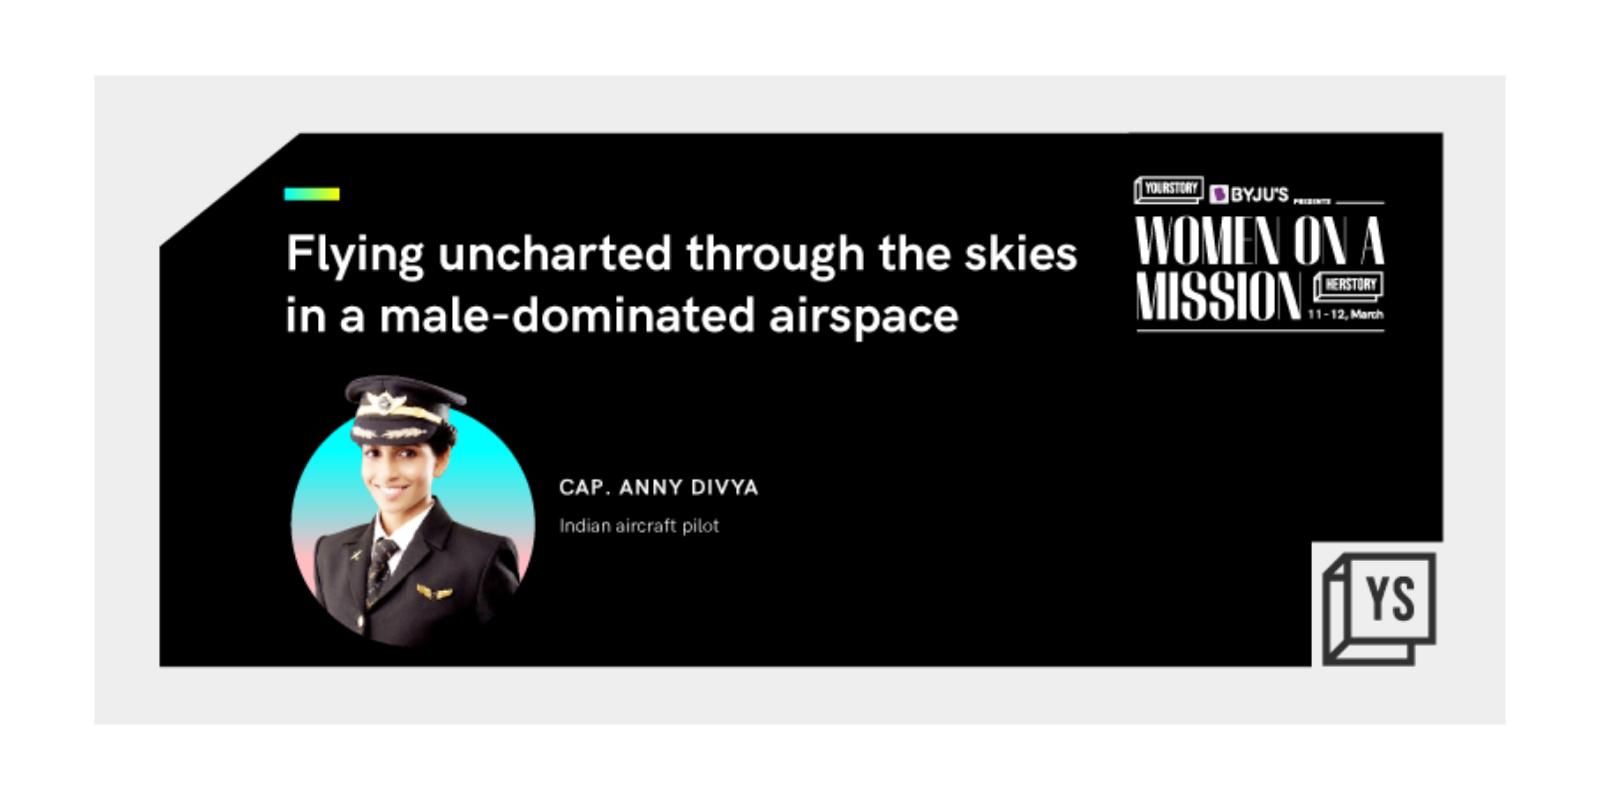 From a dreamer to becoming the world's youngest commander to fly Boeing 777, the story of Captain Anny Divya